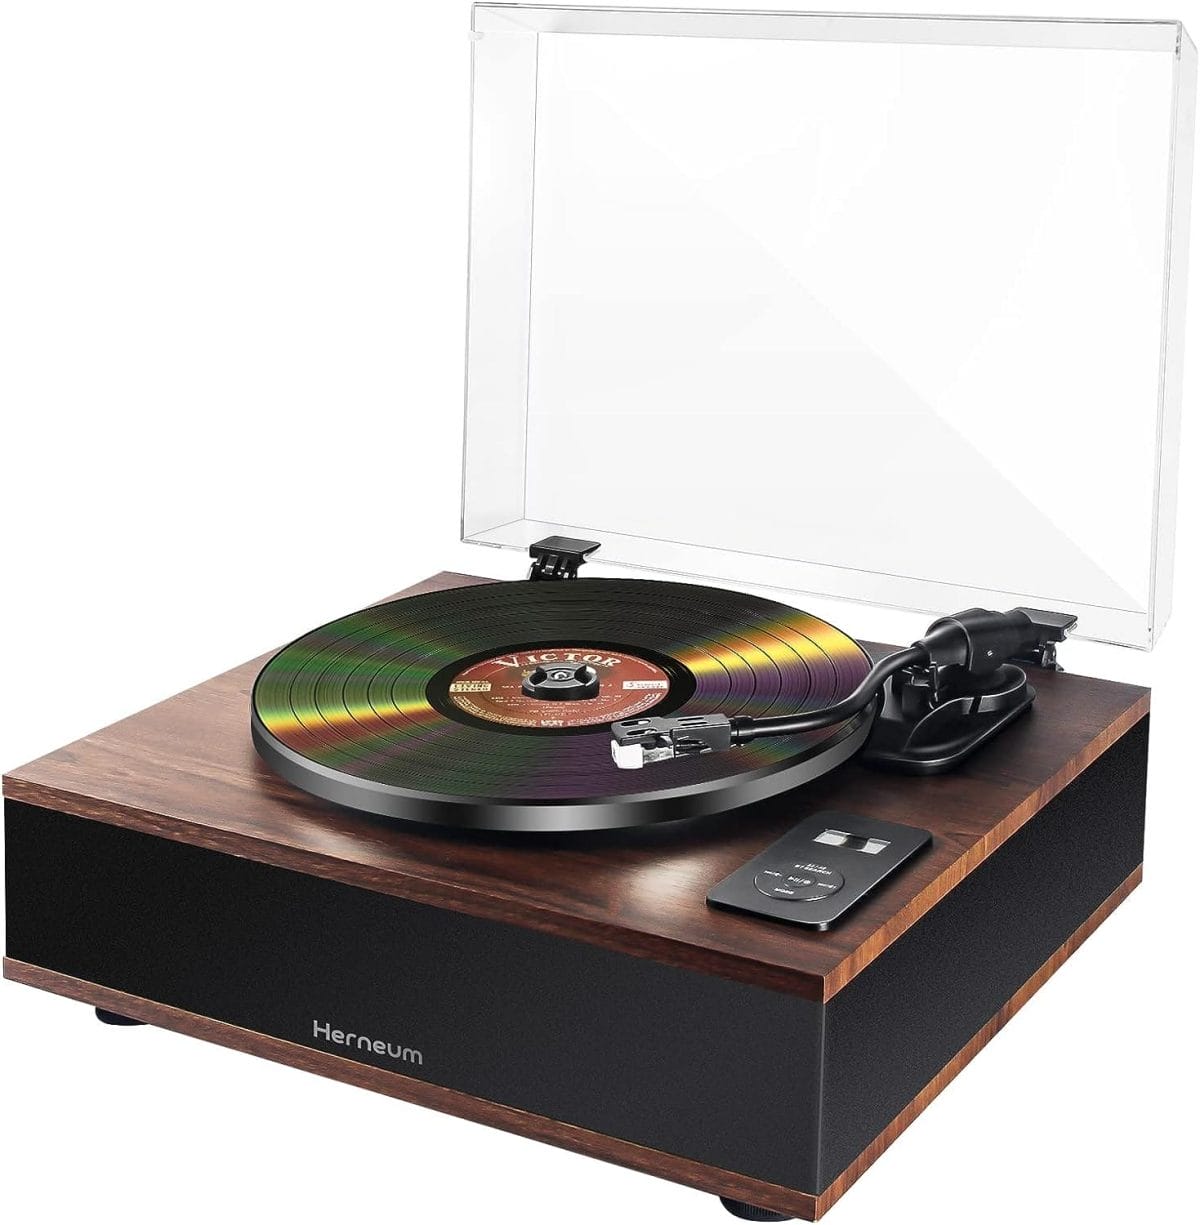 Image shows a stock image of the record player.